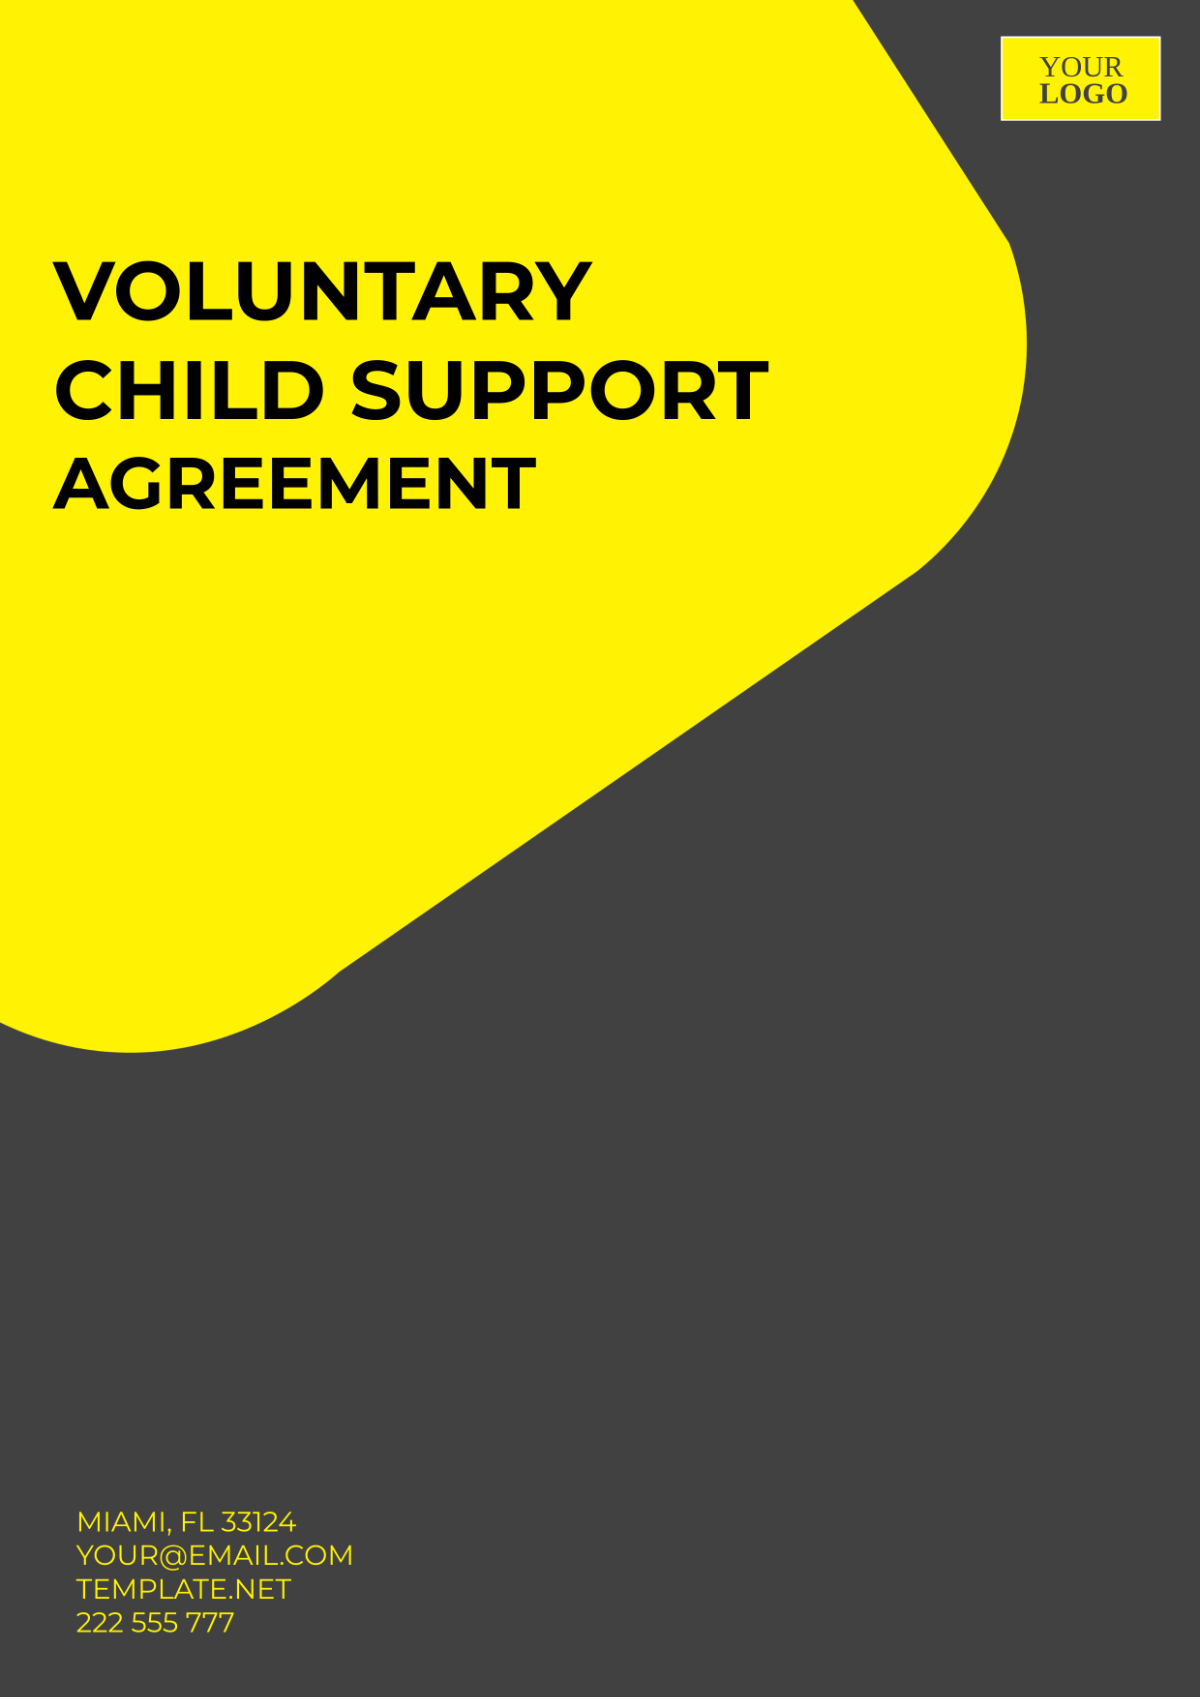 Voluntary Child Support Agreement Template